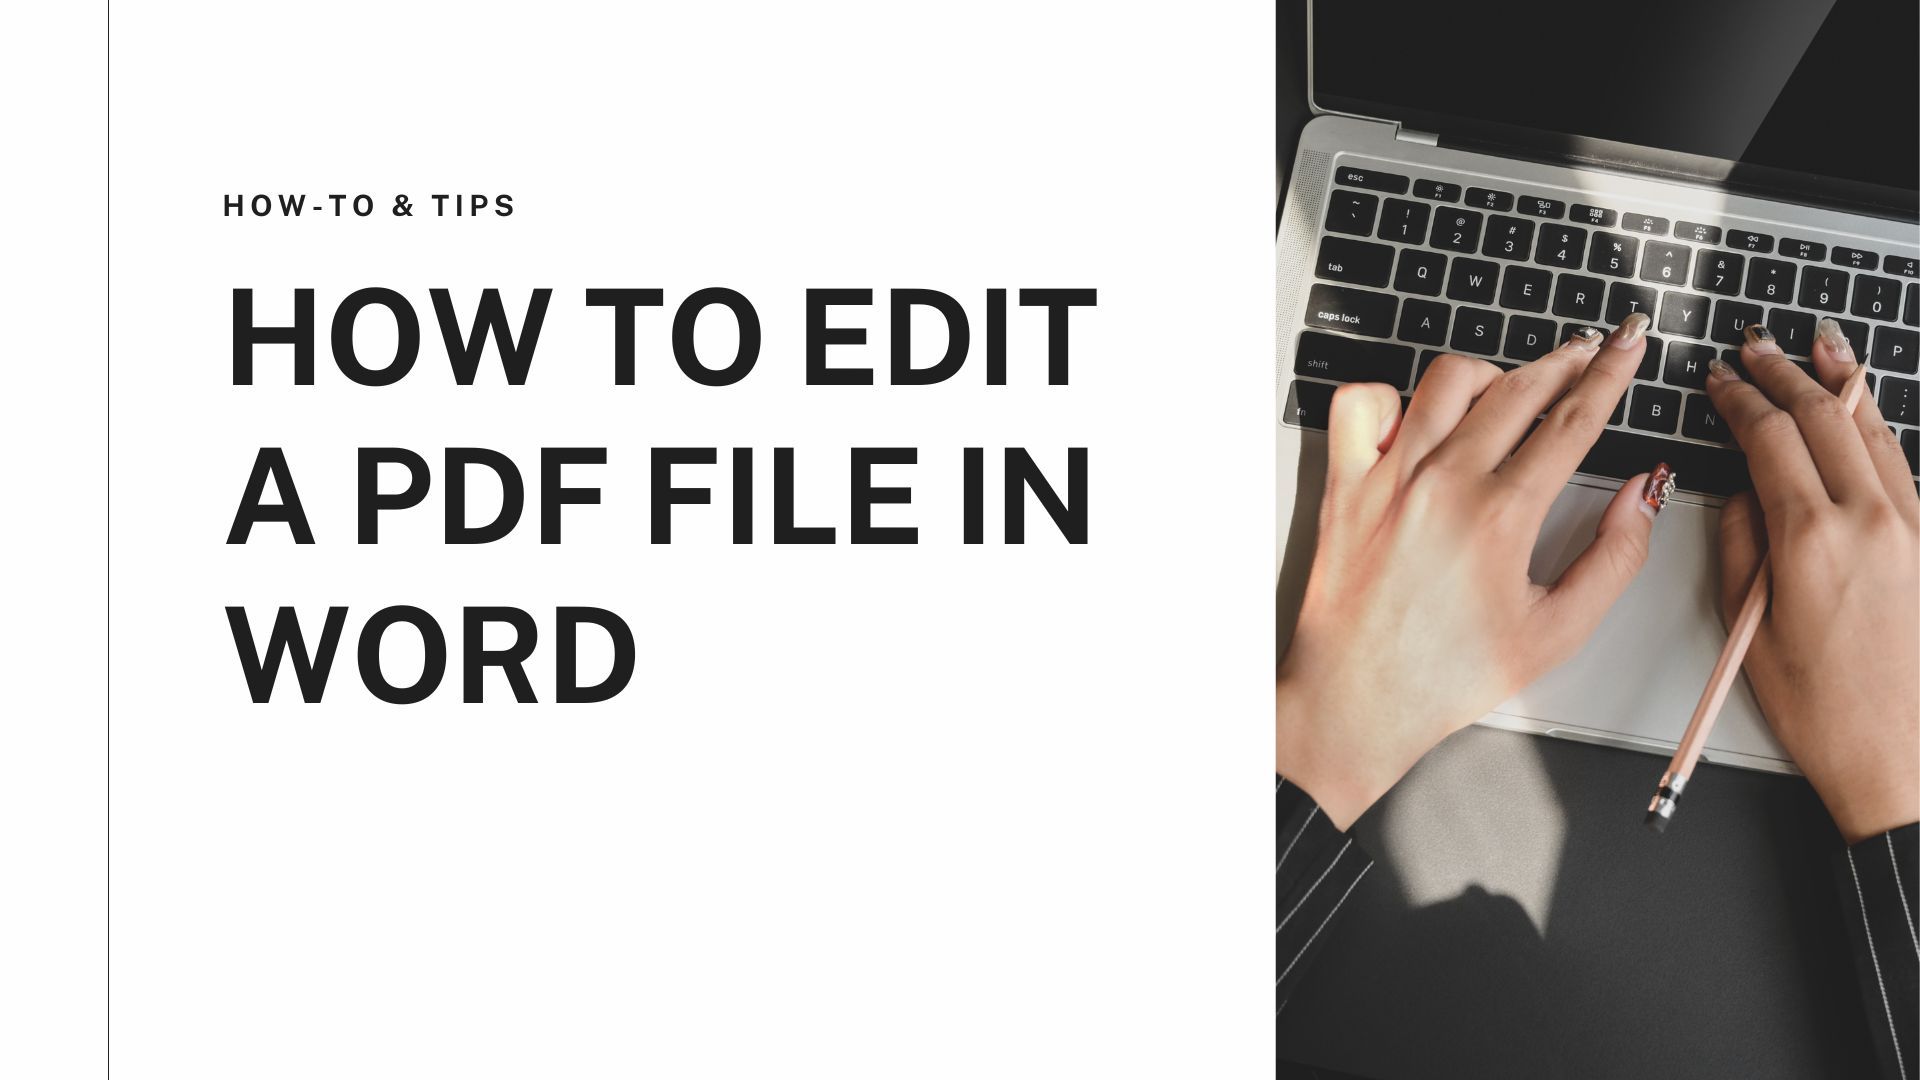 How to edit a PDF file in Word.jpg